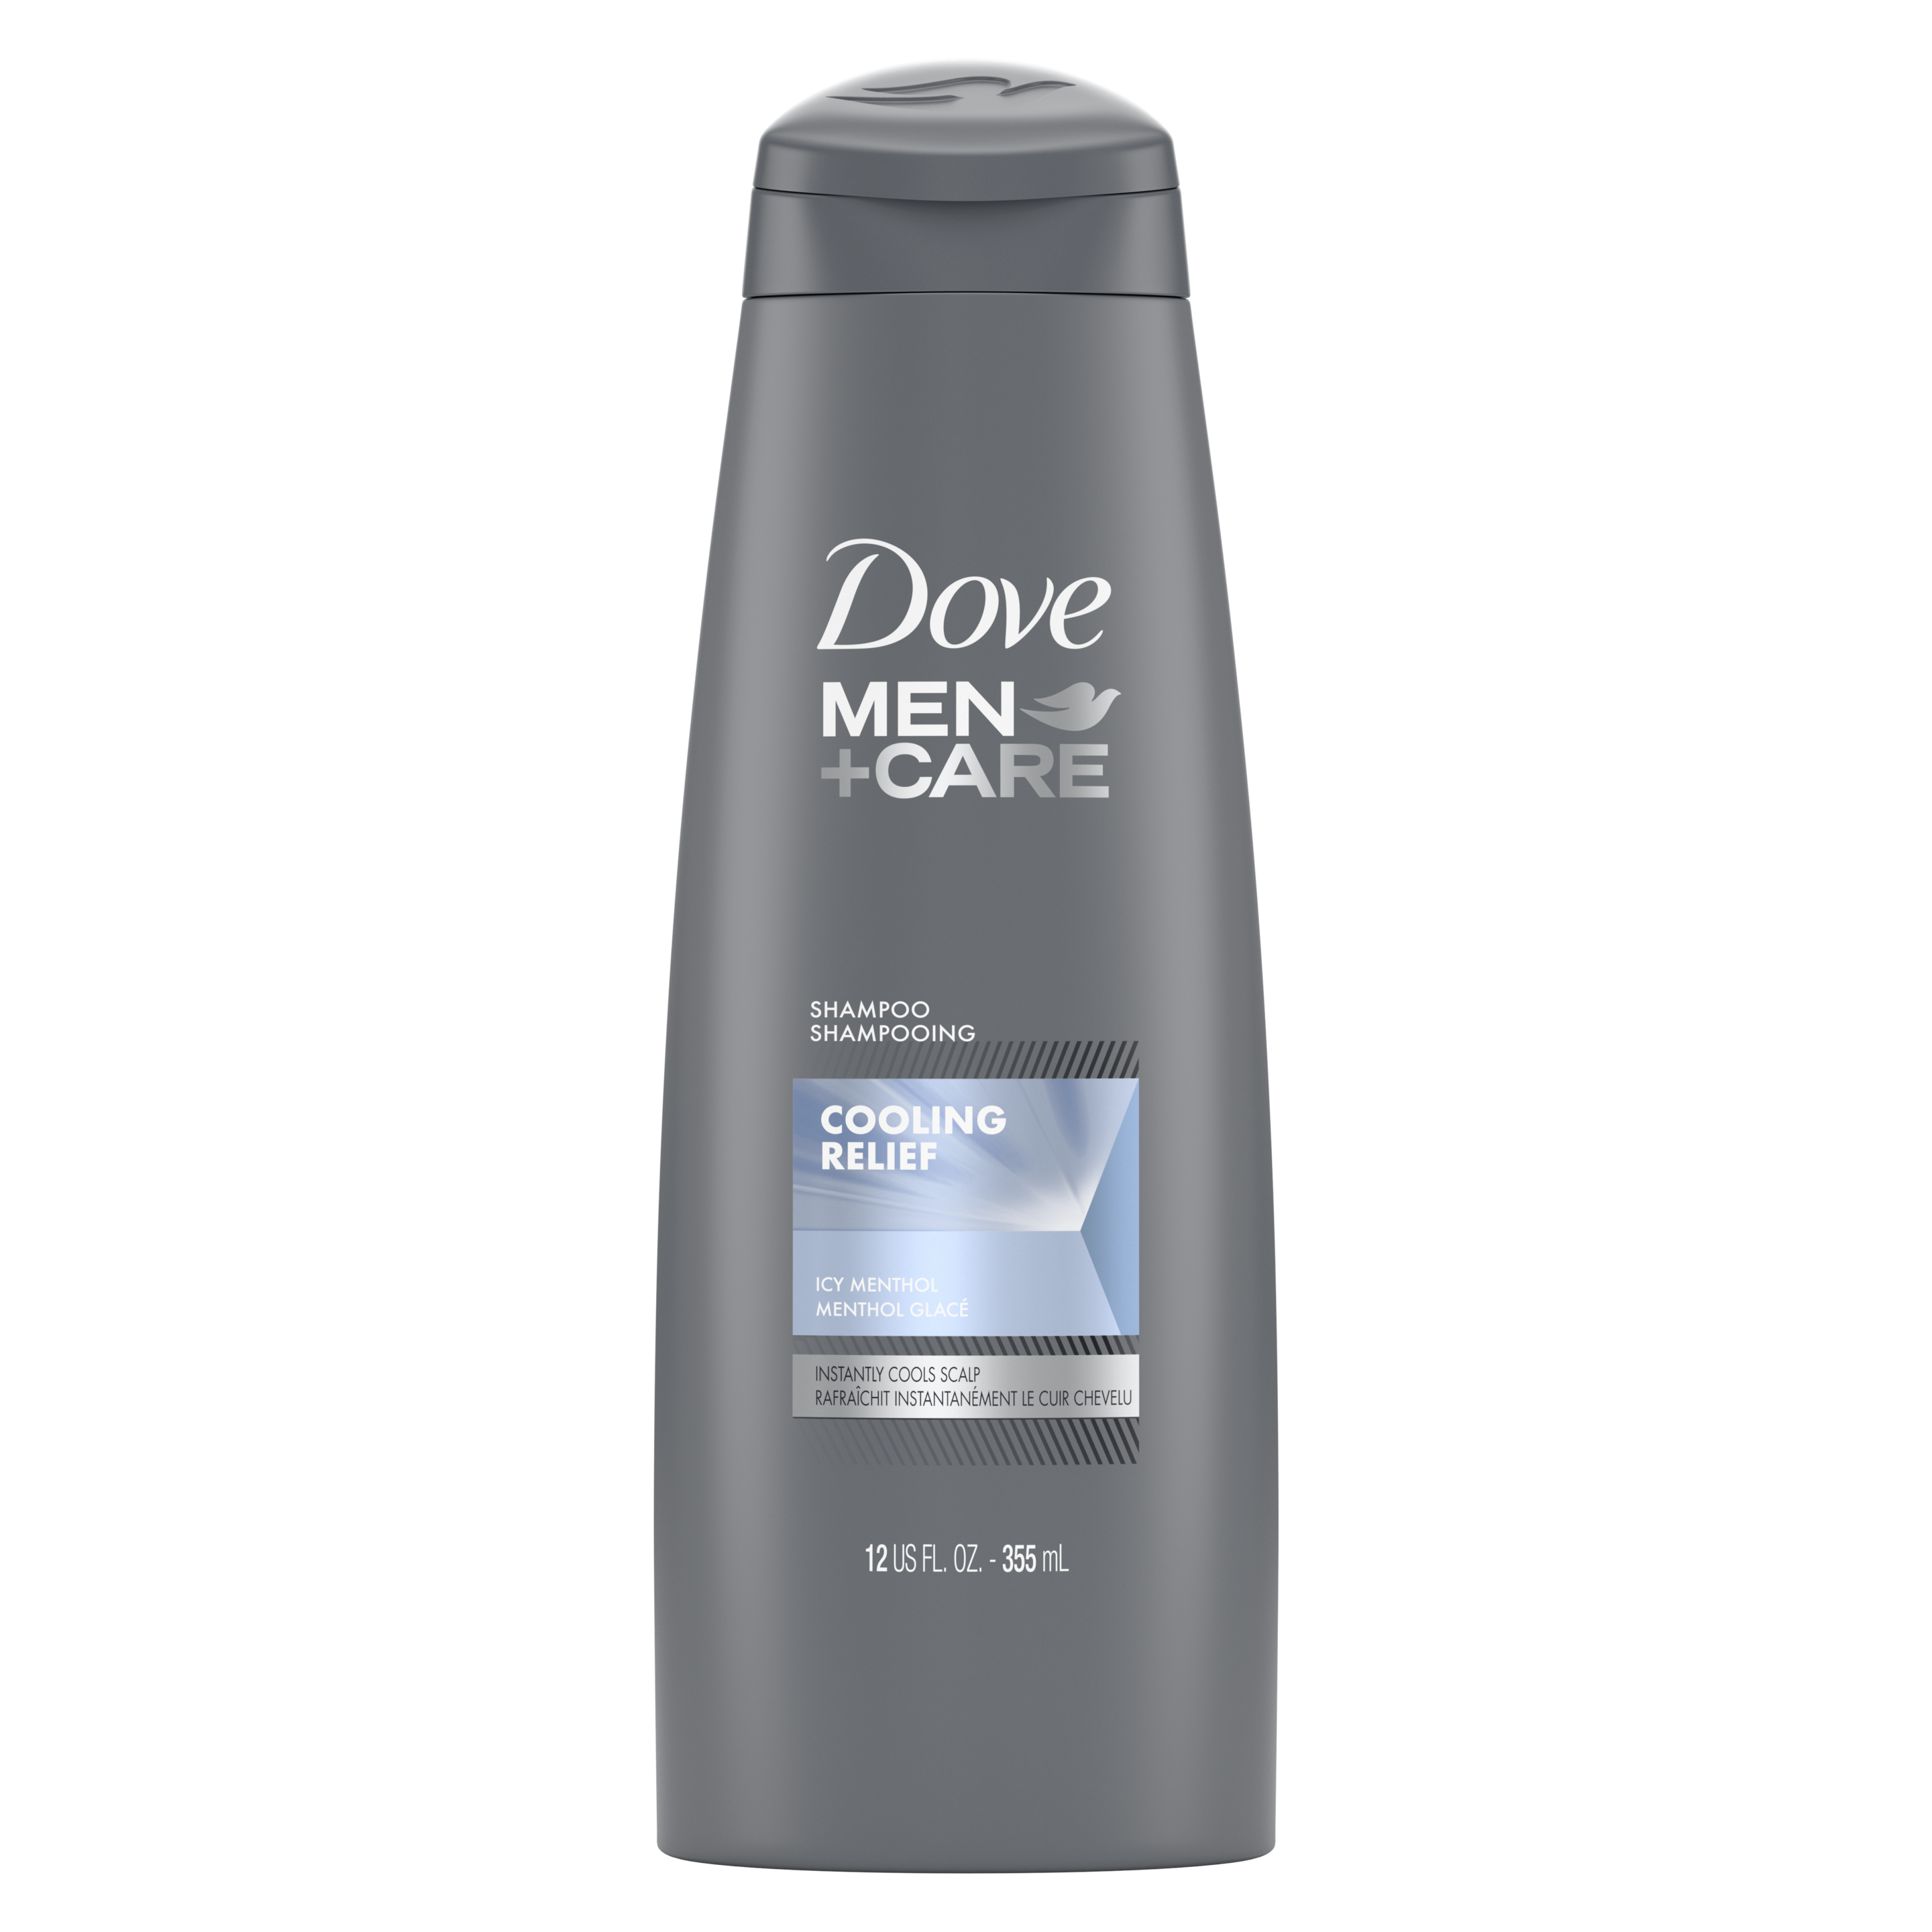 Dove Men+Care Shampoo Cooling Relief